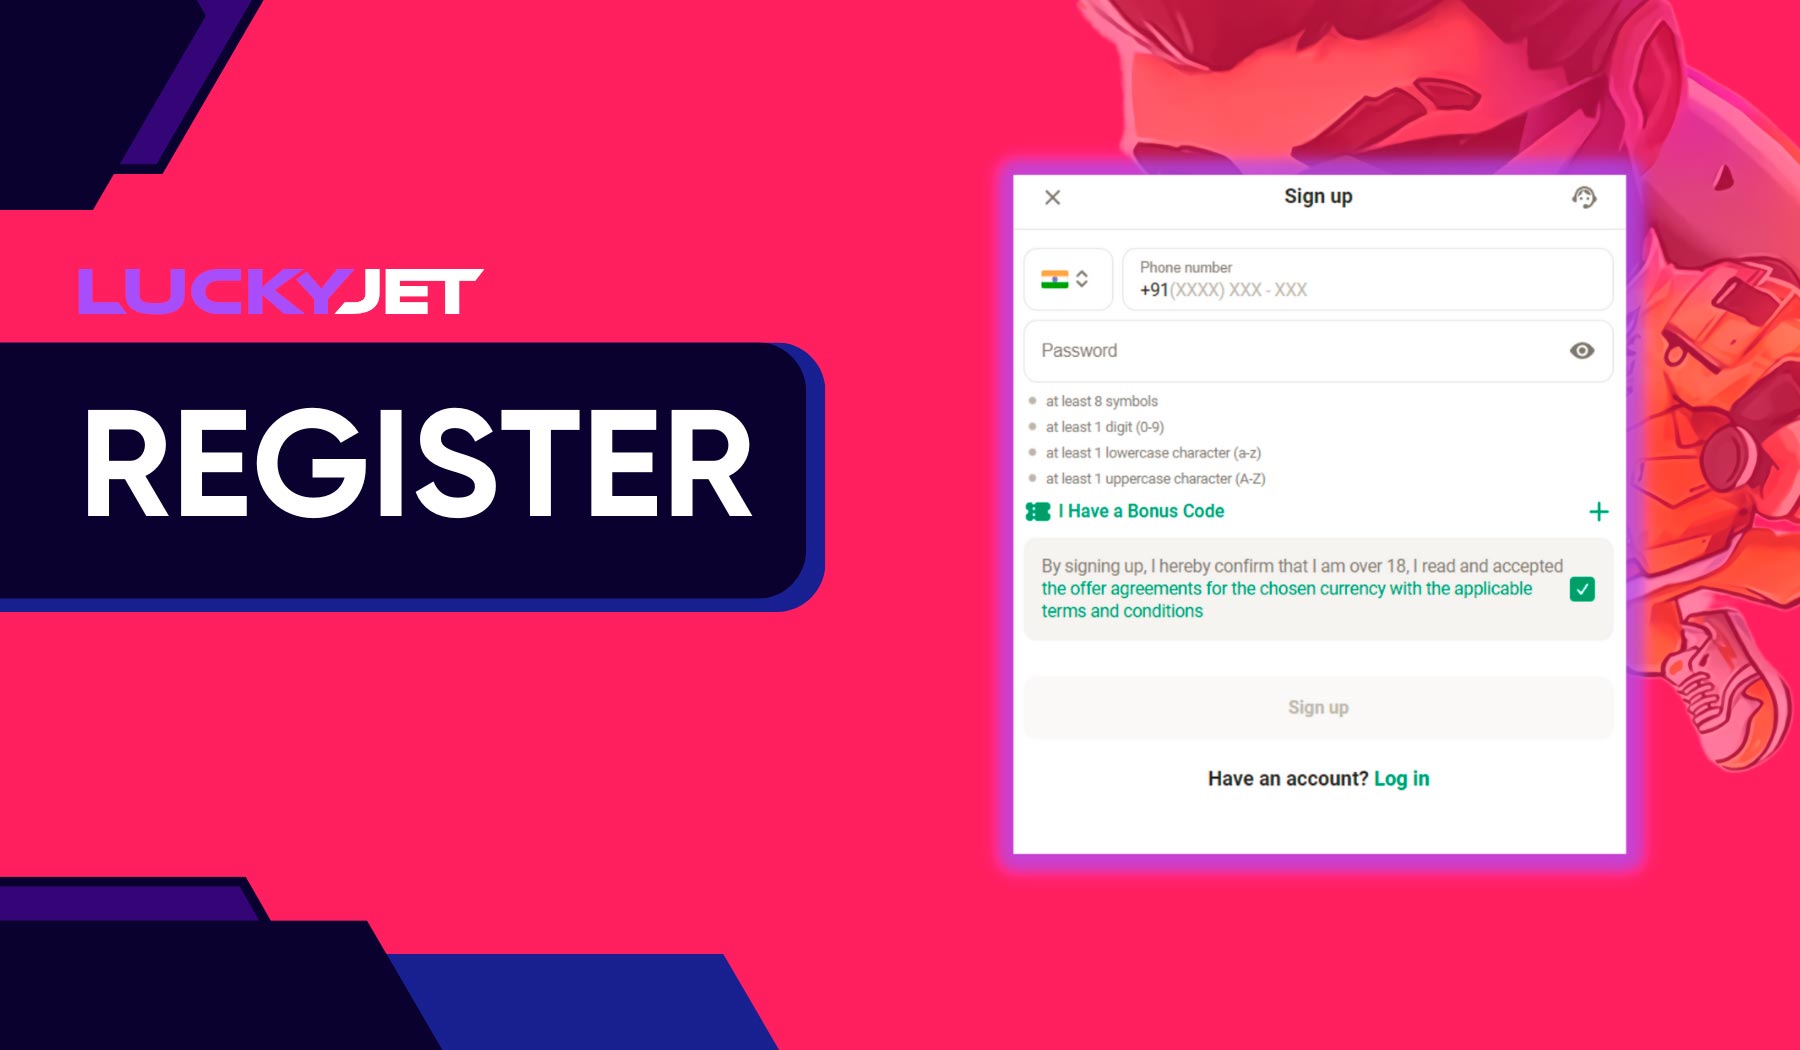 To play Lucky Jet, you need to complete a quick registration on the Parimatch platform